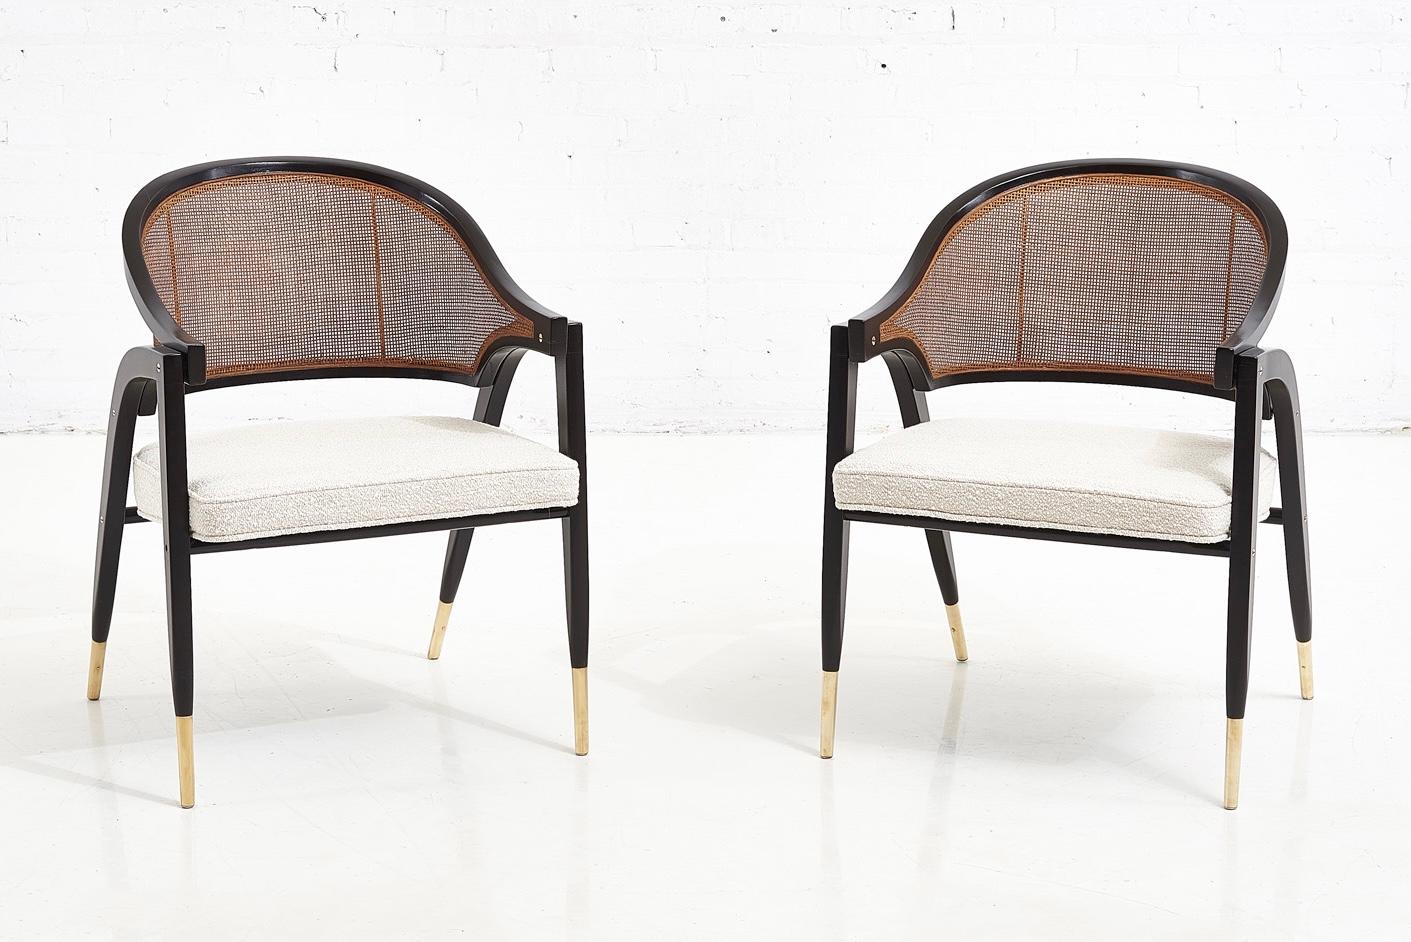 Pair of armchairs designed by Edward Wormley for Dunbar. Sculptural form wood frames with brass details. Cane backs, new boucle upholstered seats.